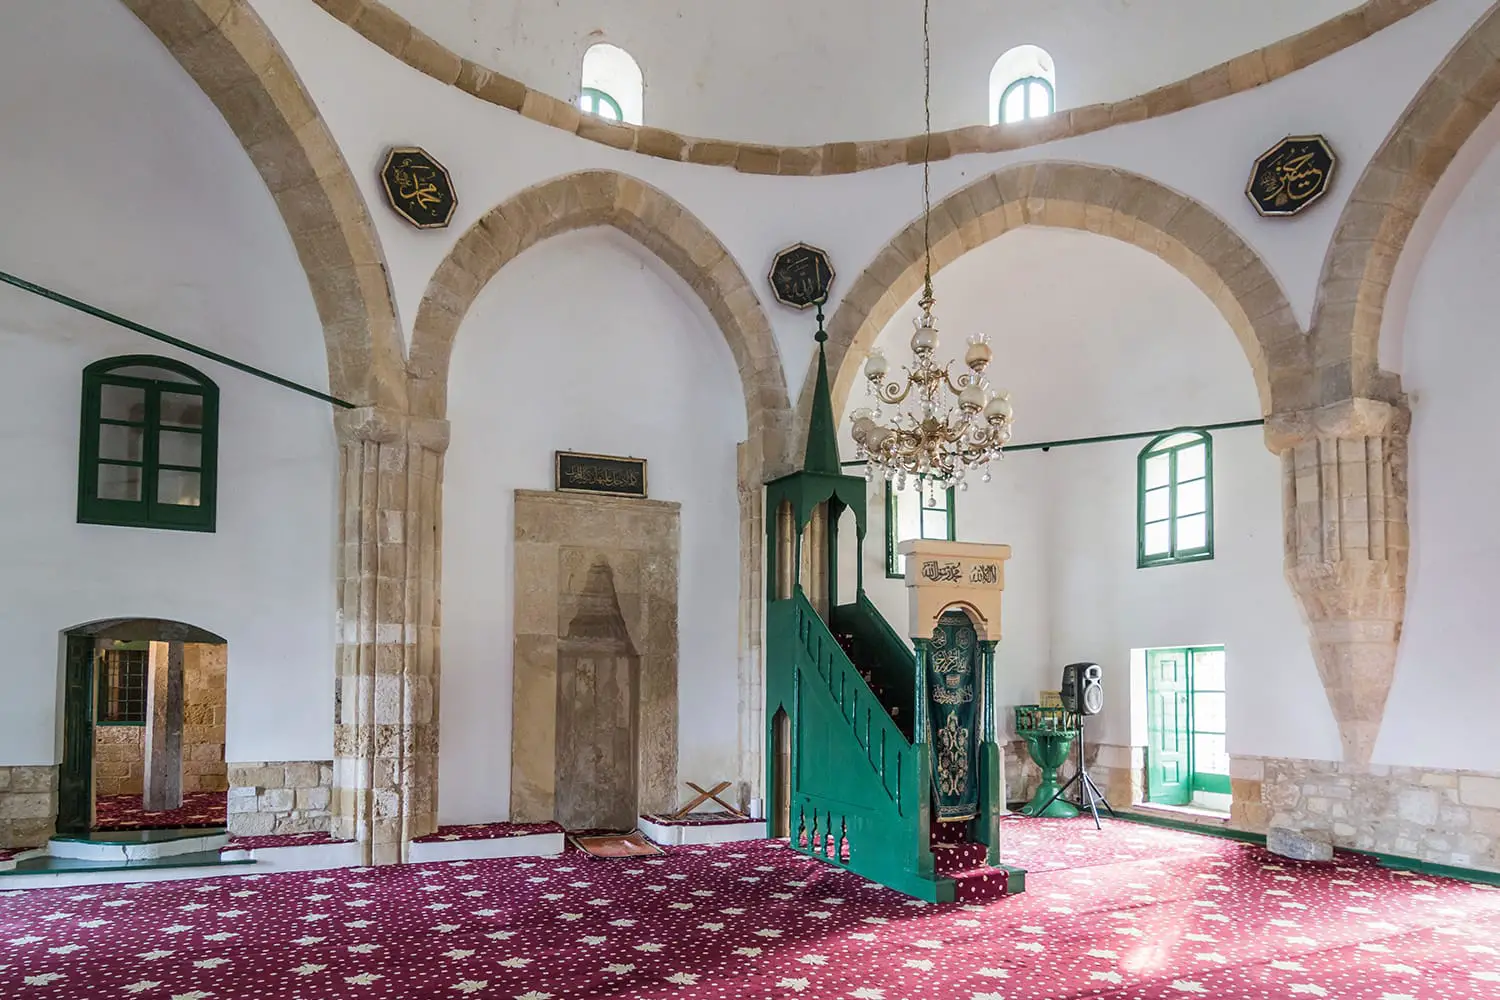 he mikhrab, minbar and interior of Hala Sultan Tekke mosque, one of the holiest islamic worship places